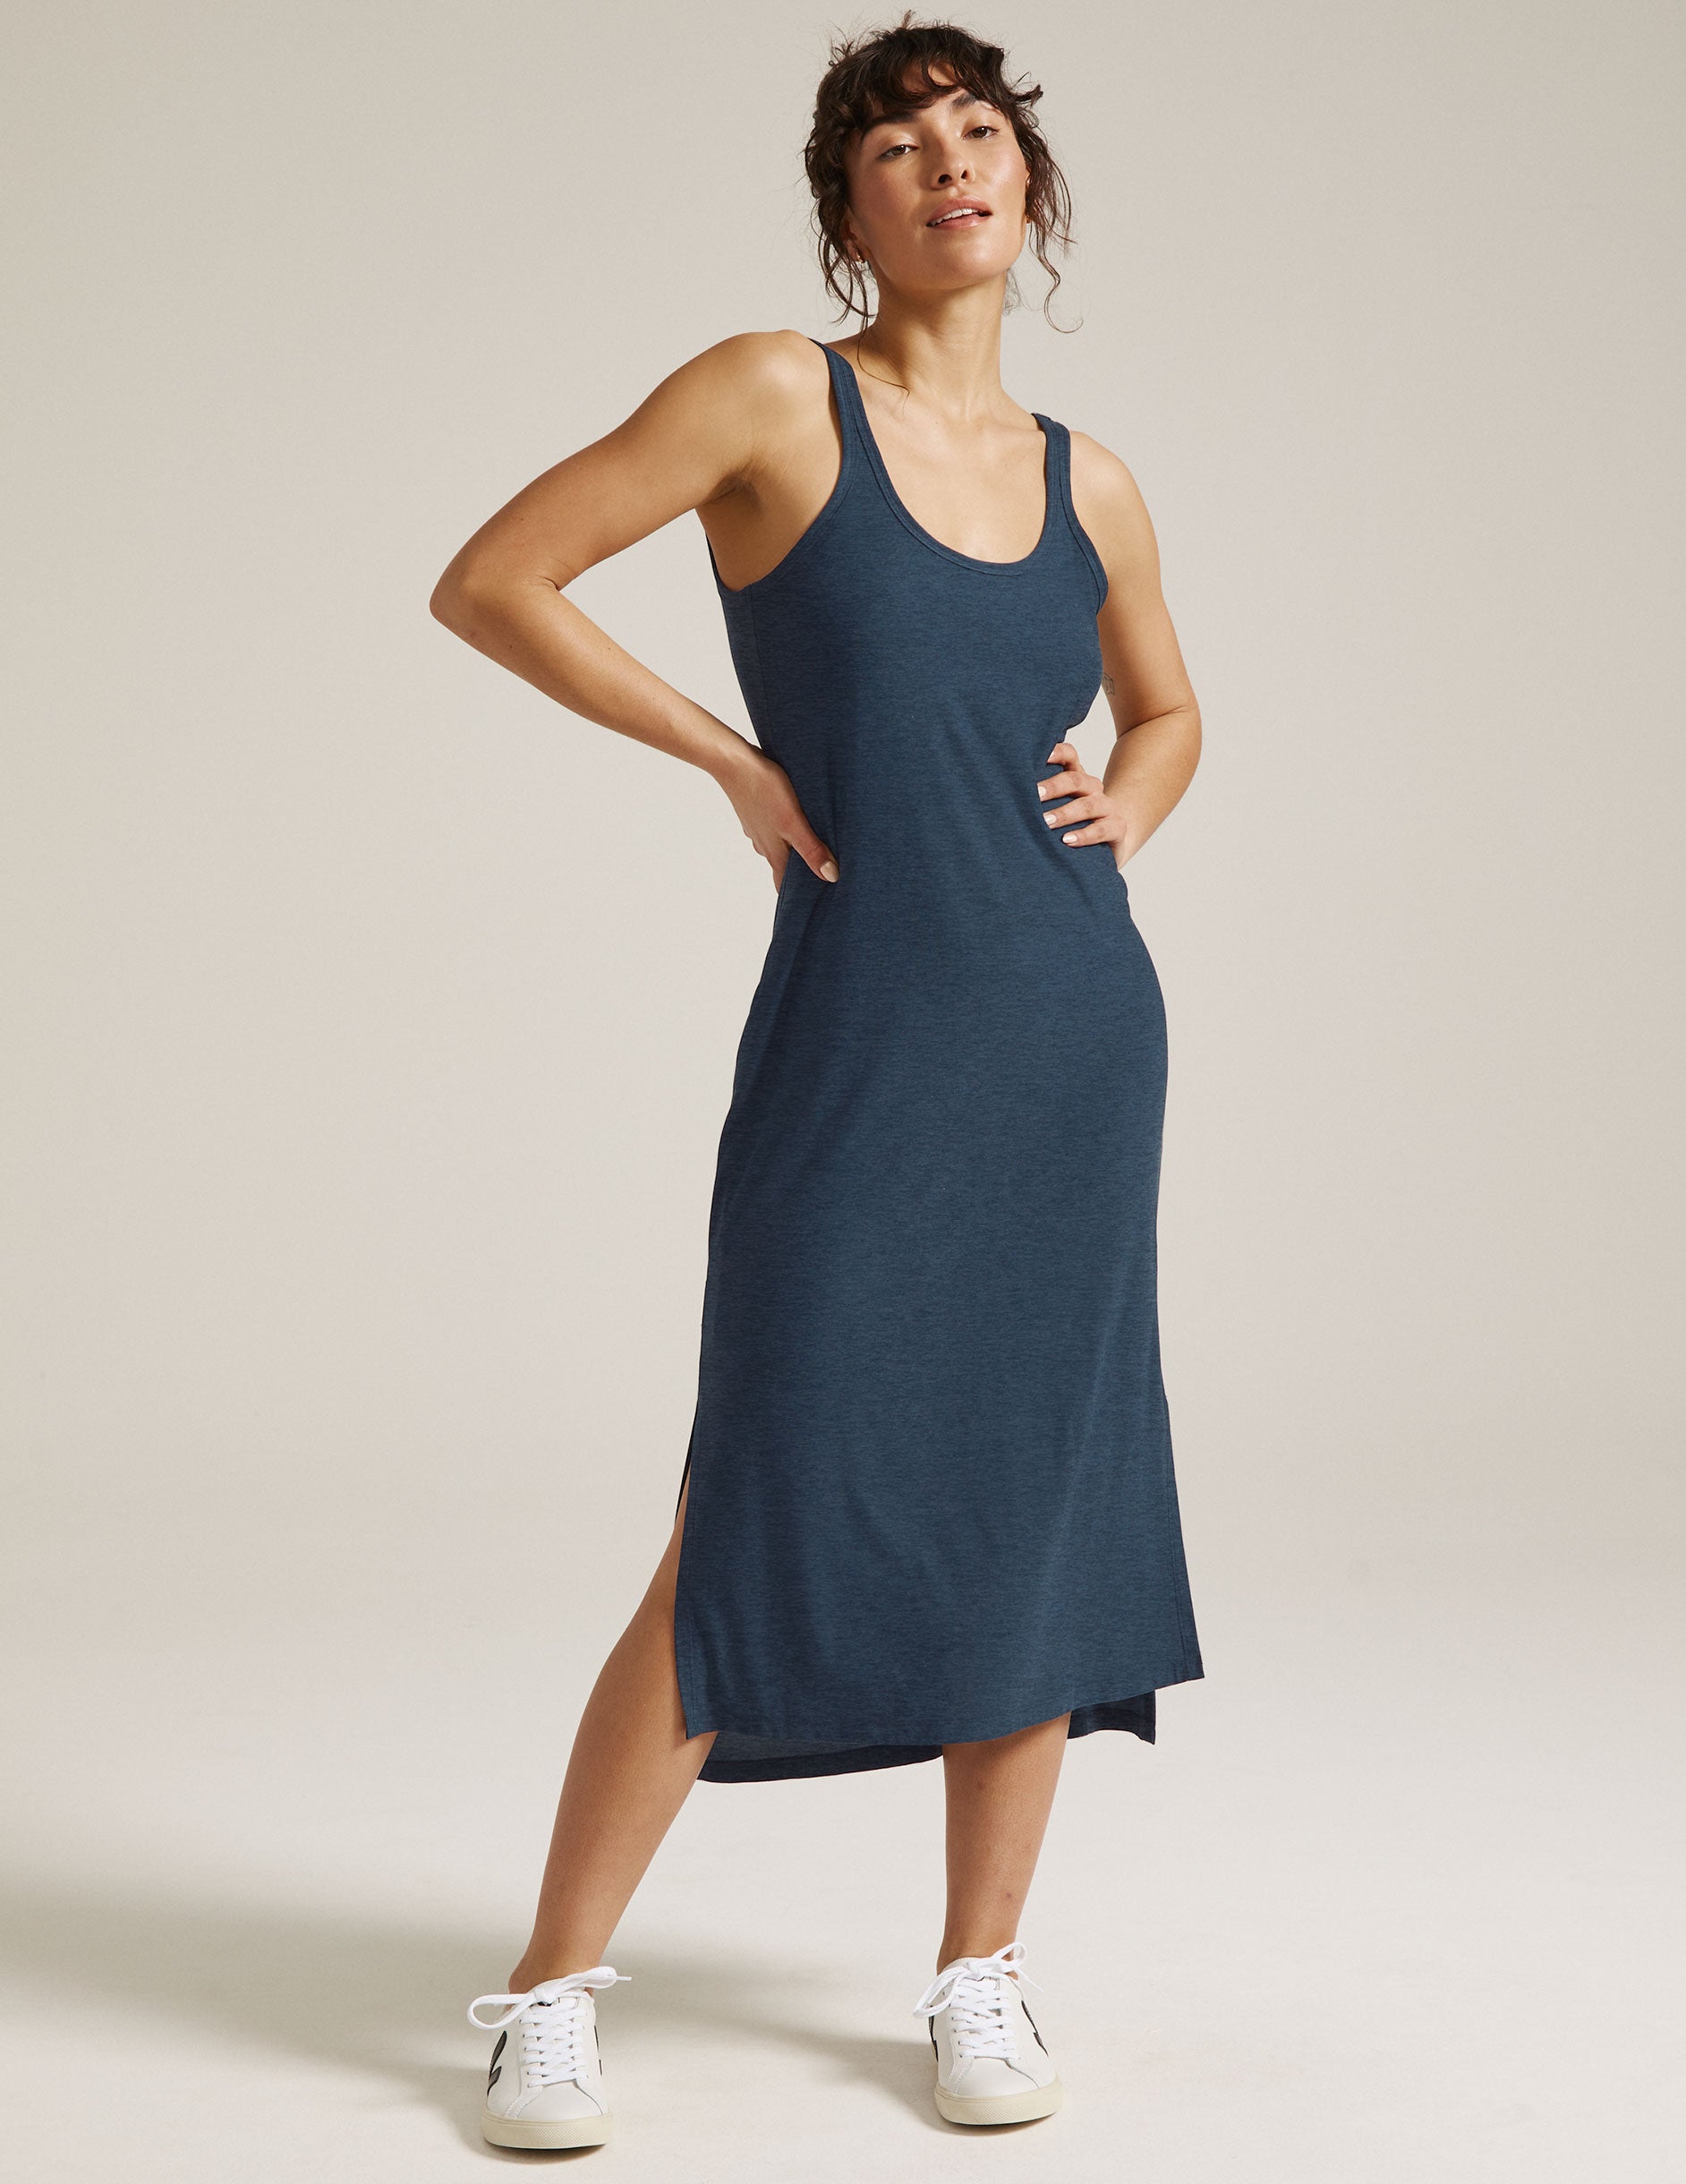 Uniqlo, T-shirt Dress With Built in Bra, Navy Blue